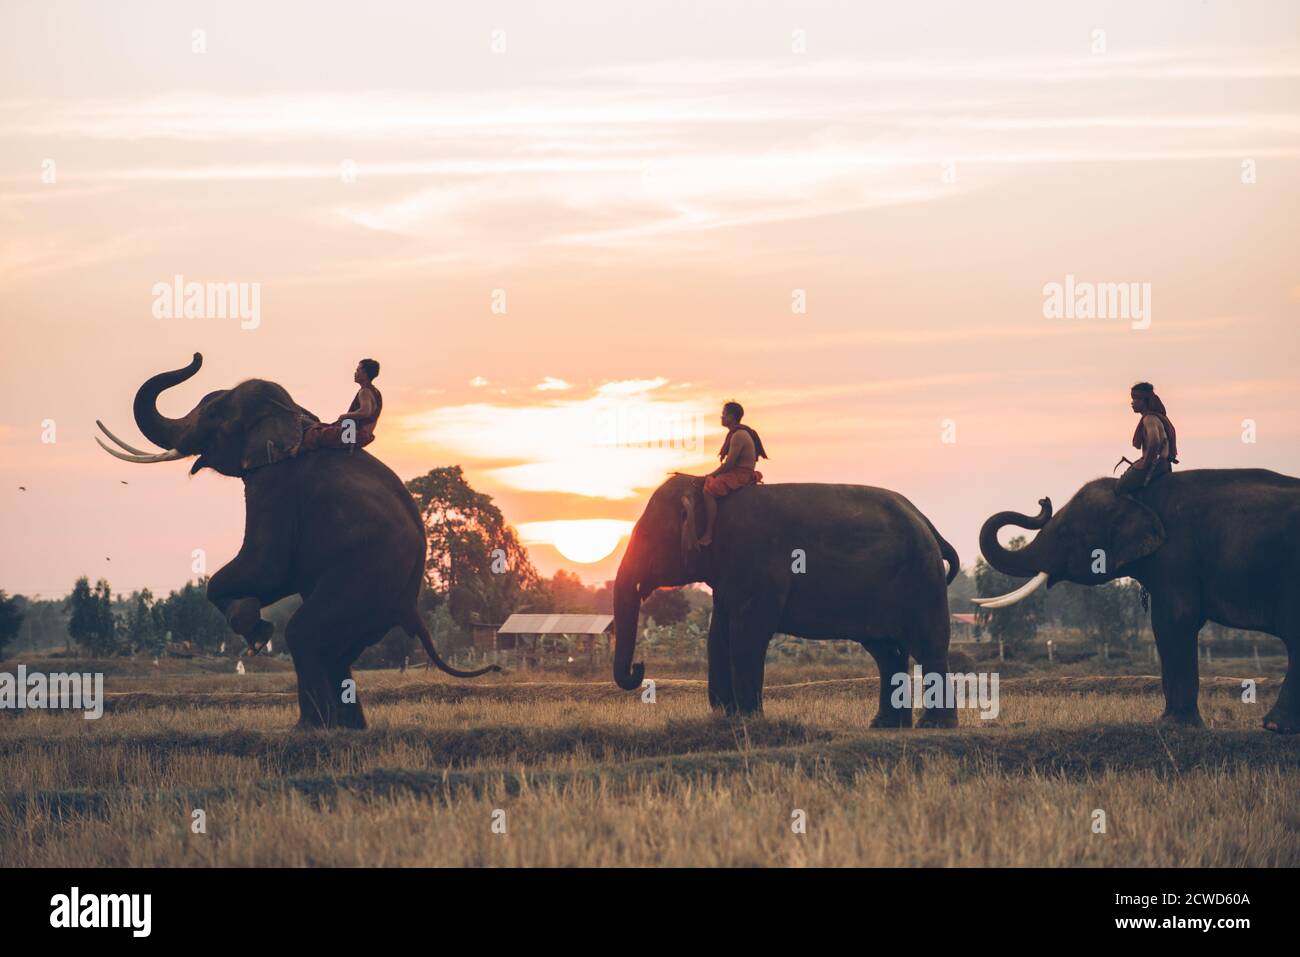 Man and his elephant in northern thailand Stock Photo